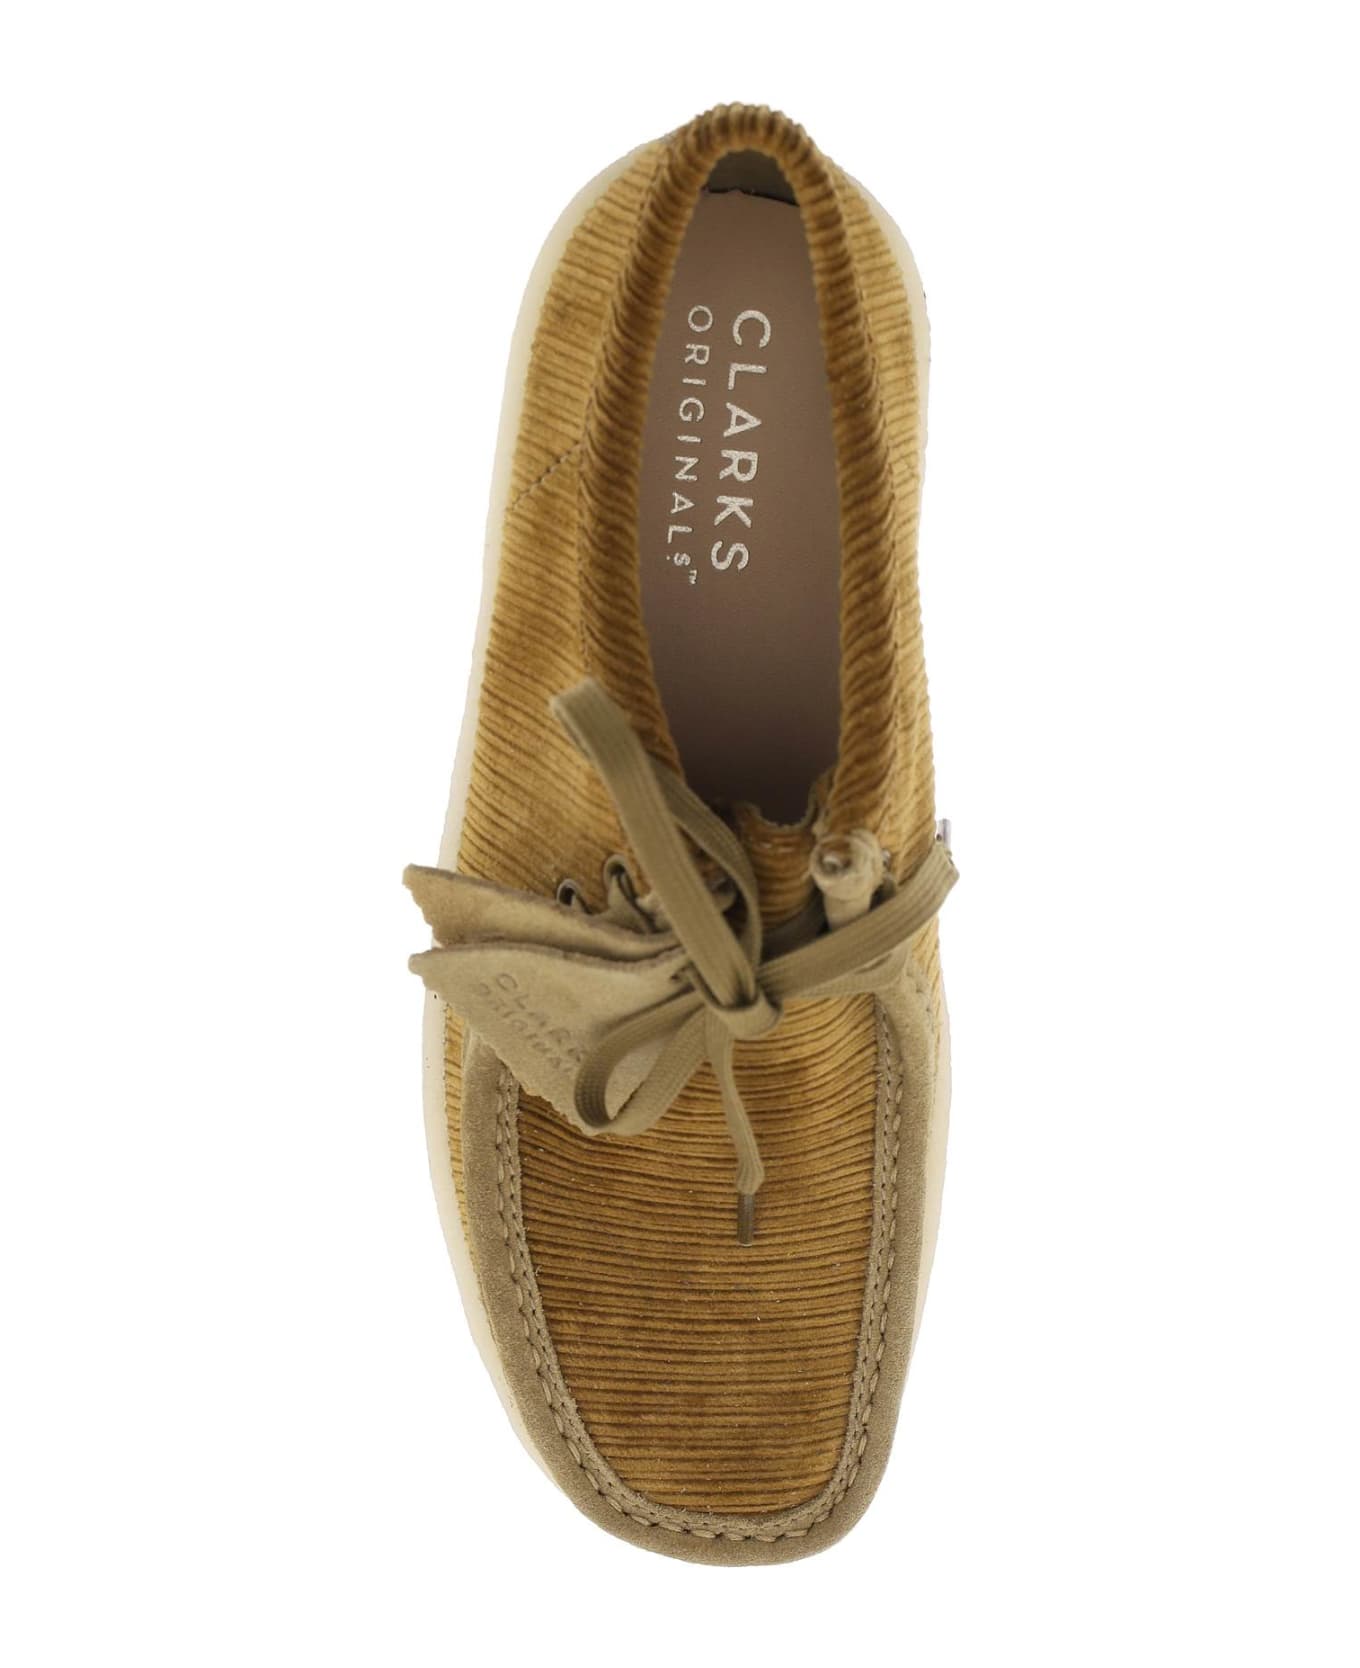 Clarks Wallabee Cup Lace-up Shoes - TAN CORD (Brown)